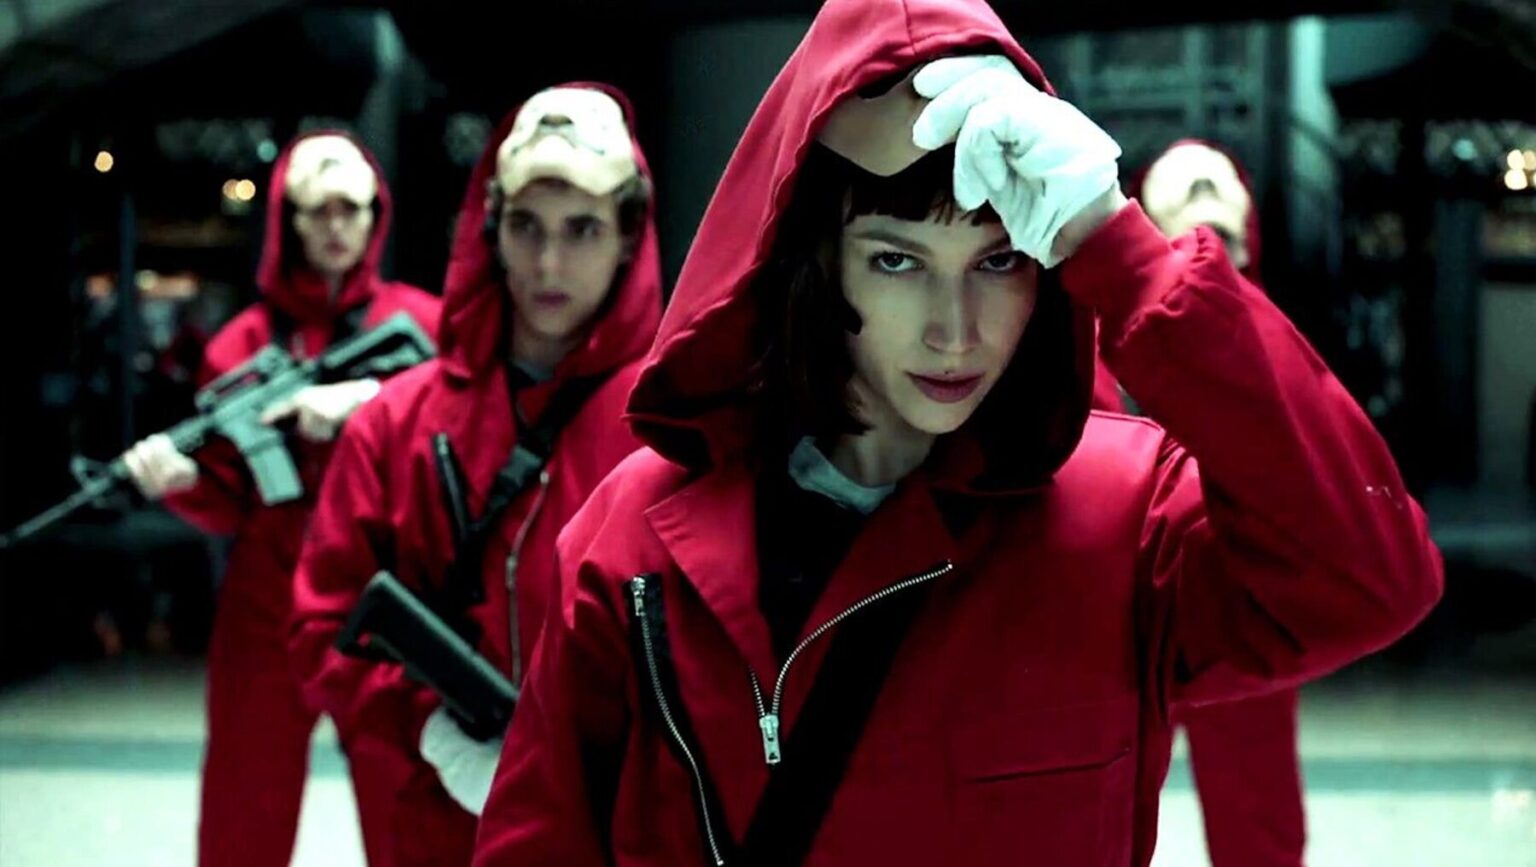 The 'Money Heist' theories just keep growing, getting wilder & more elaborate by the day. Here's what we think will happen in season 5.